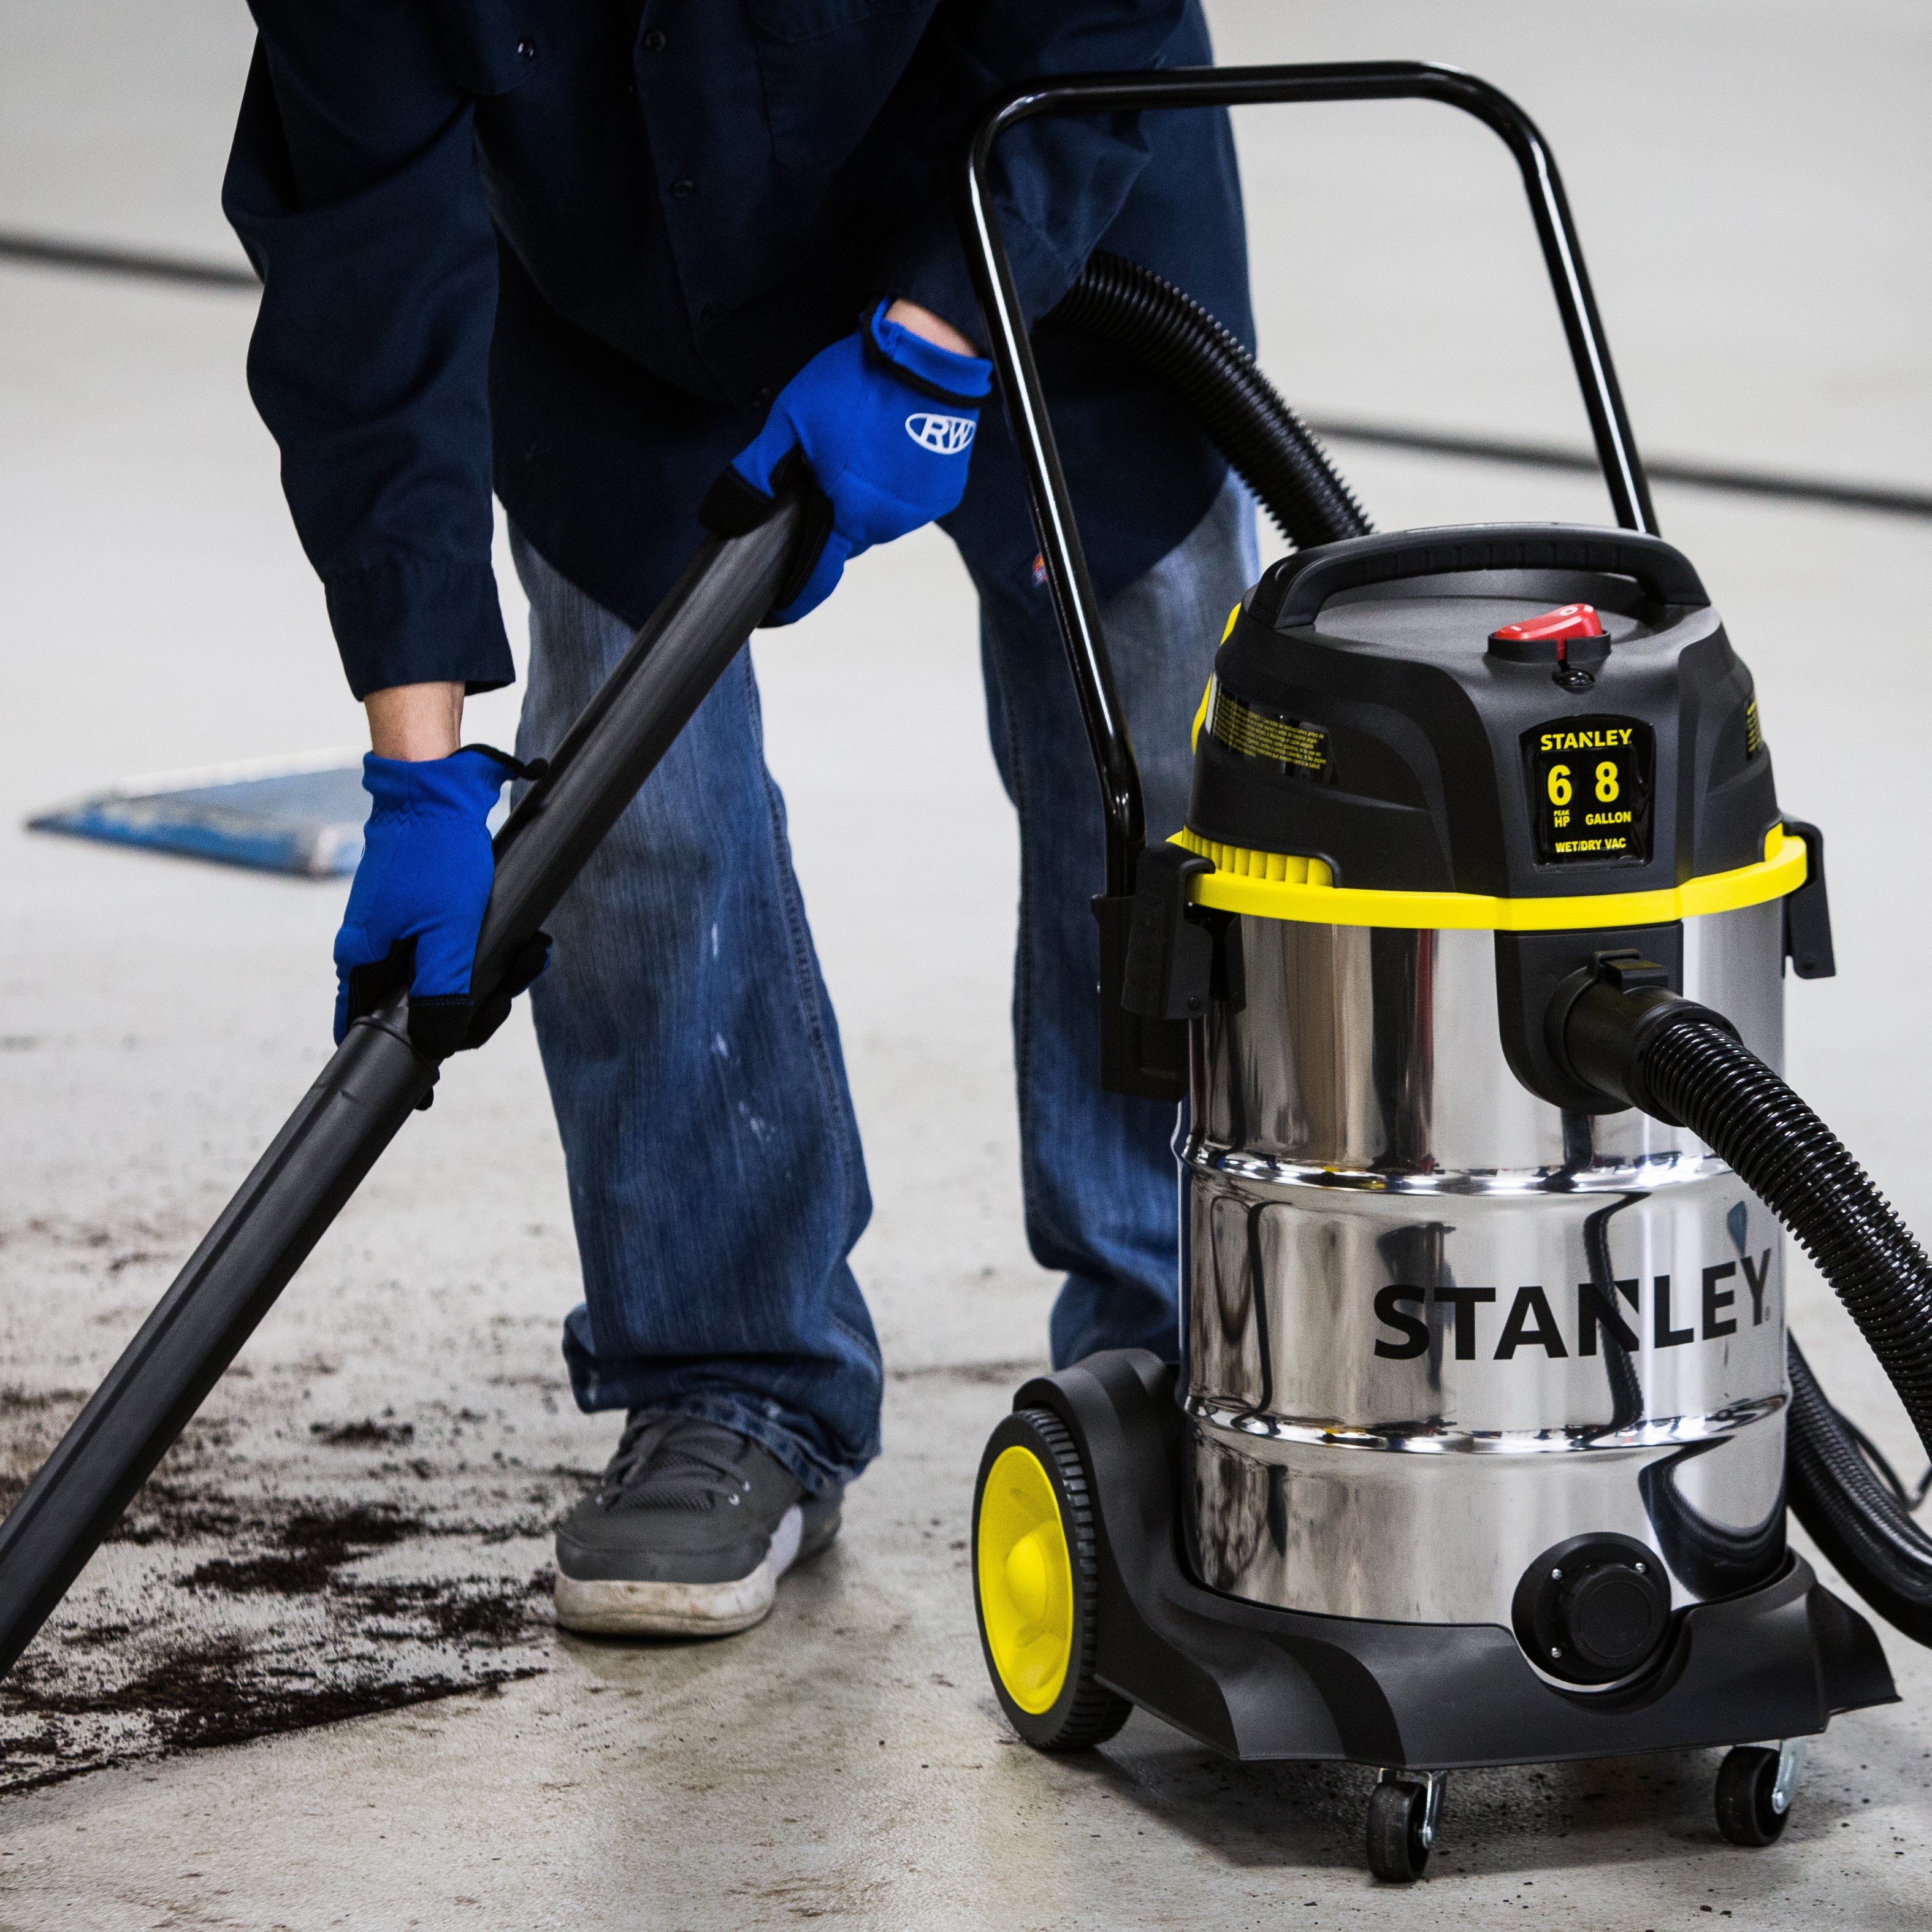 STANLEY 8 gal Stainless Steel Wet Dry Vacuum with Hose Accessories and Tool Storage - image 2 of 7